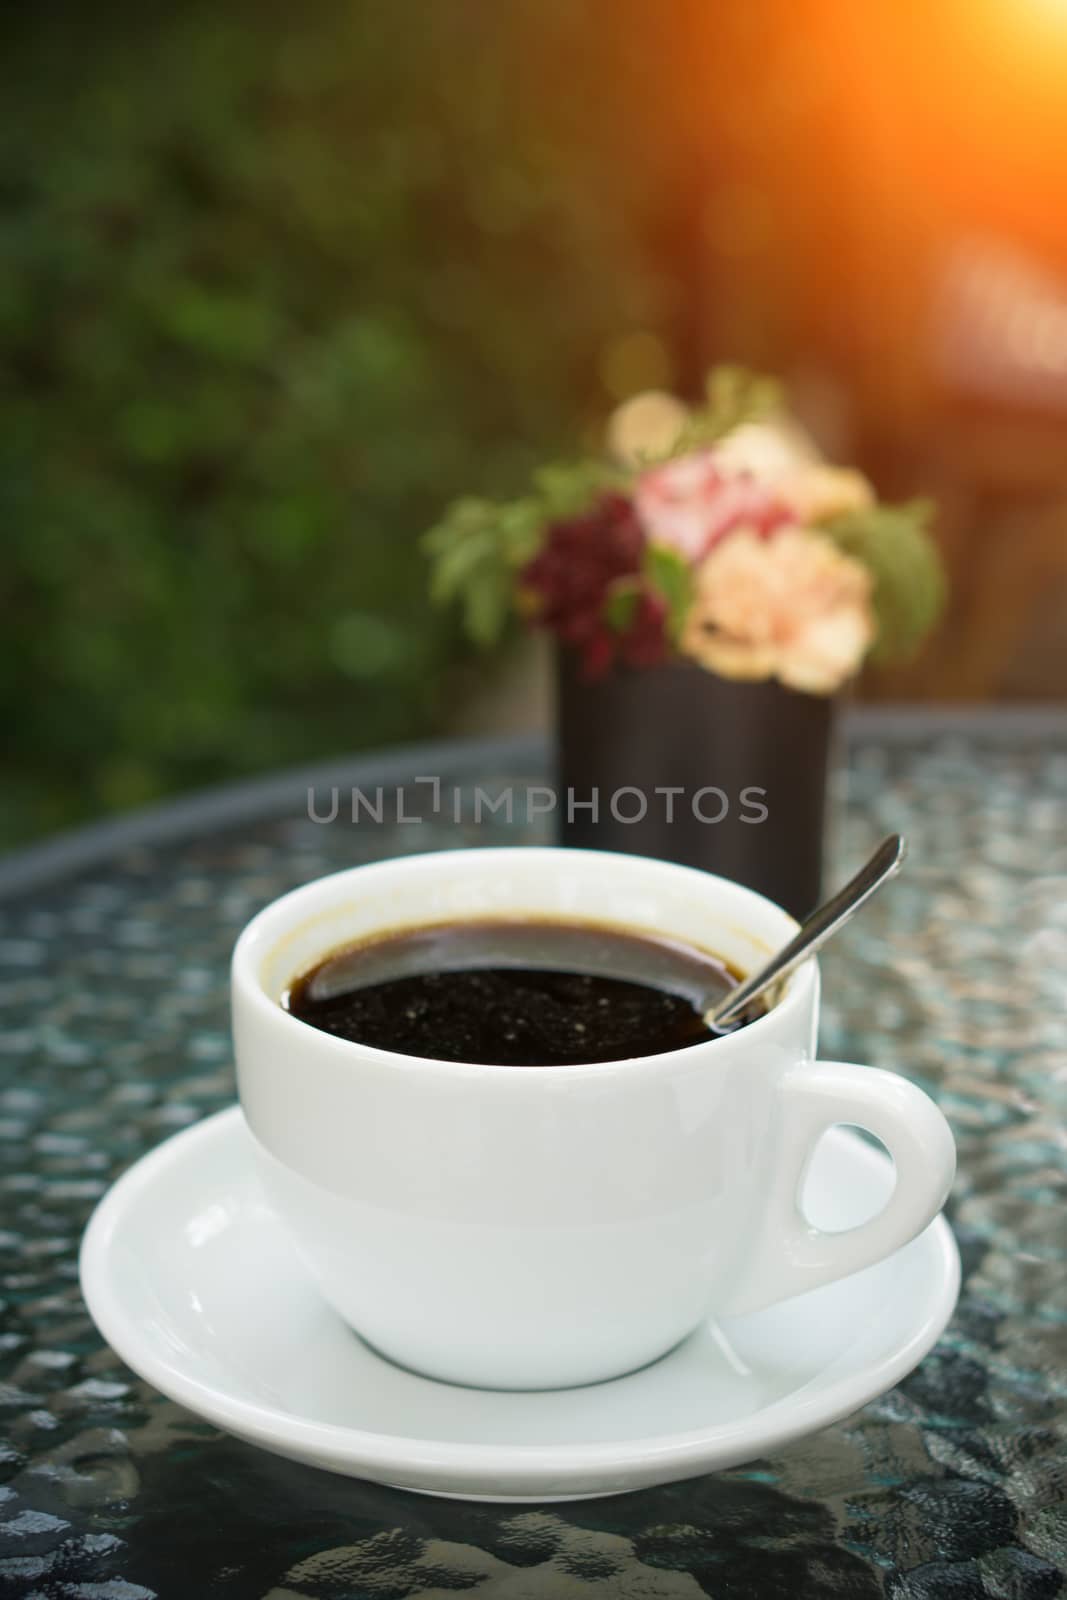 A cup of americano Coffee in coffee shop - vintage and sunlight style effect